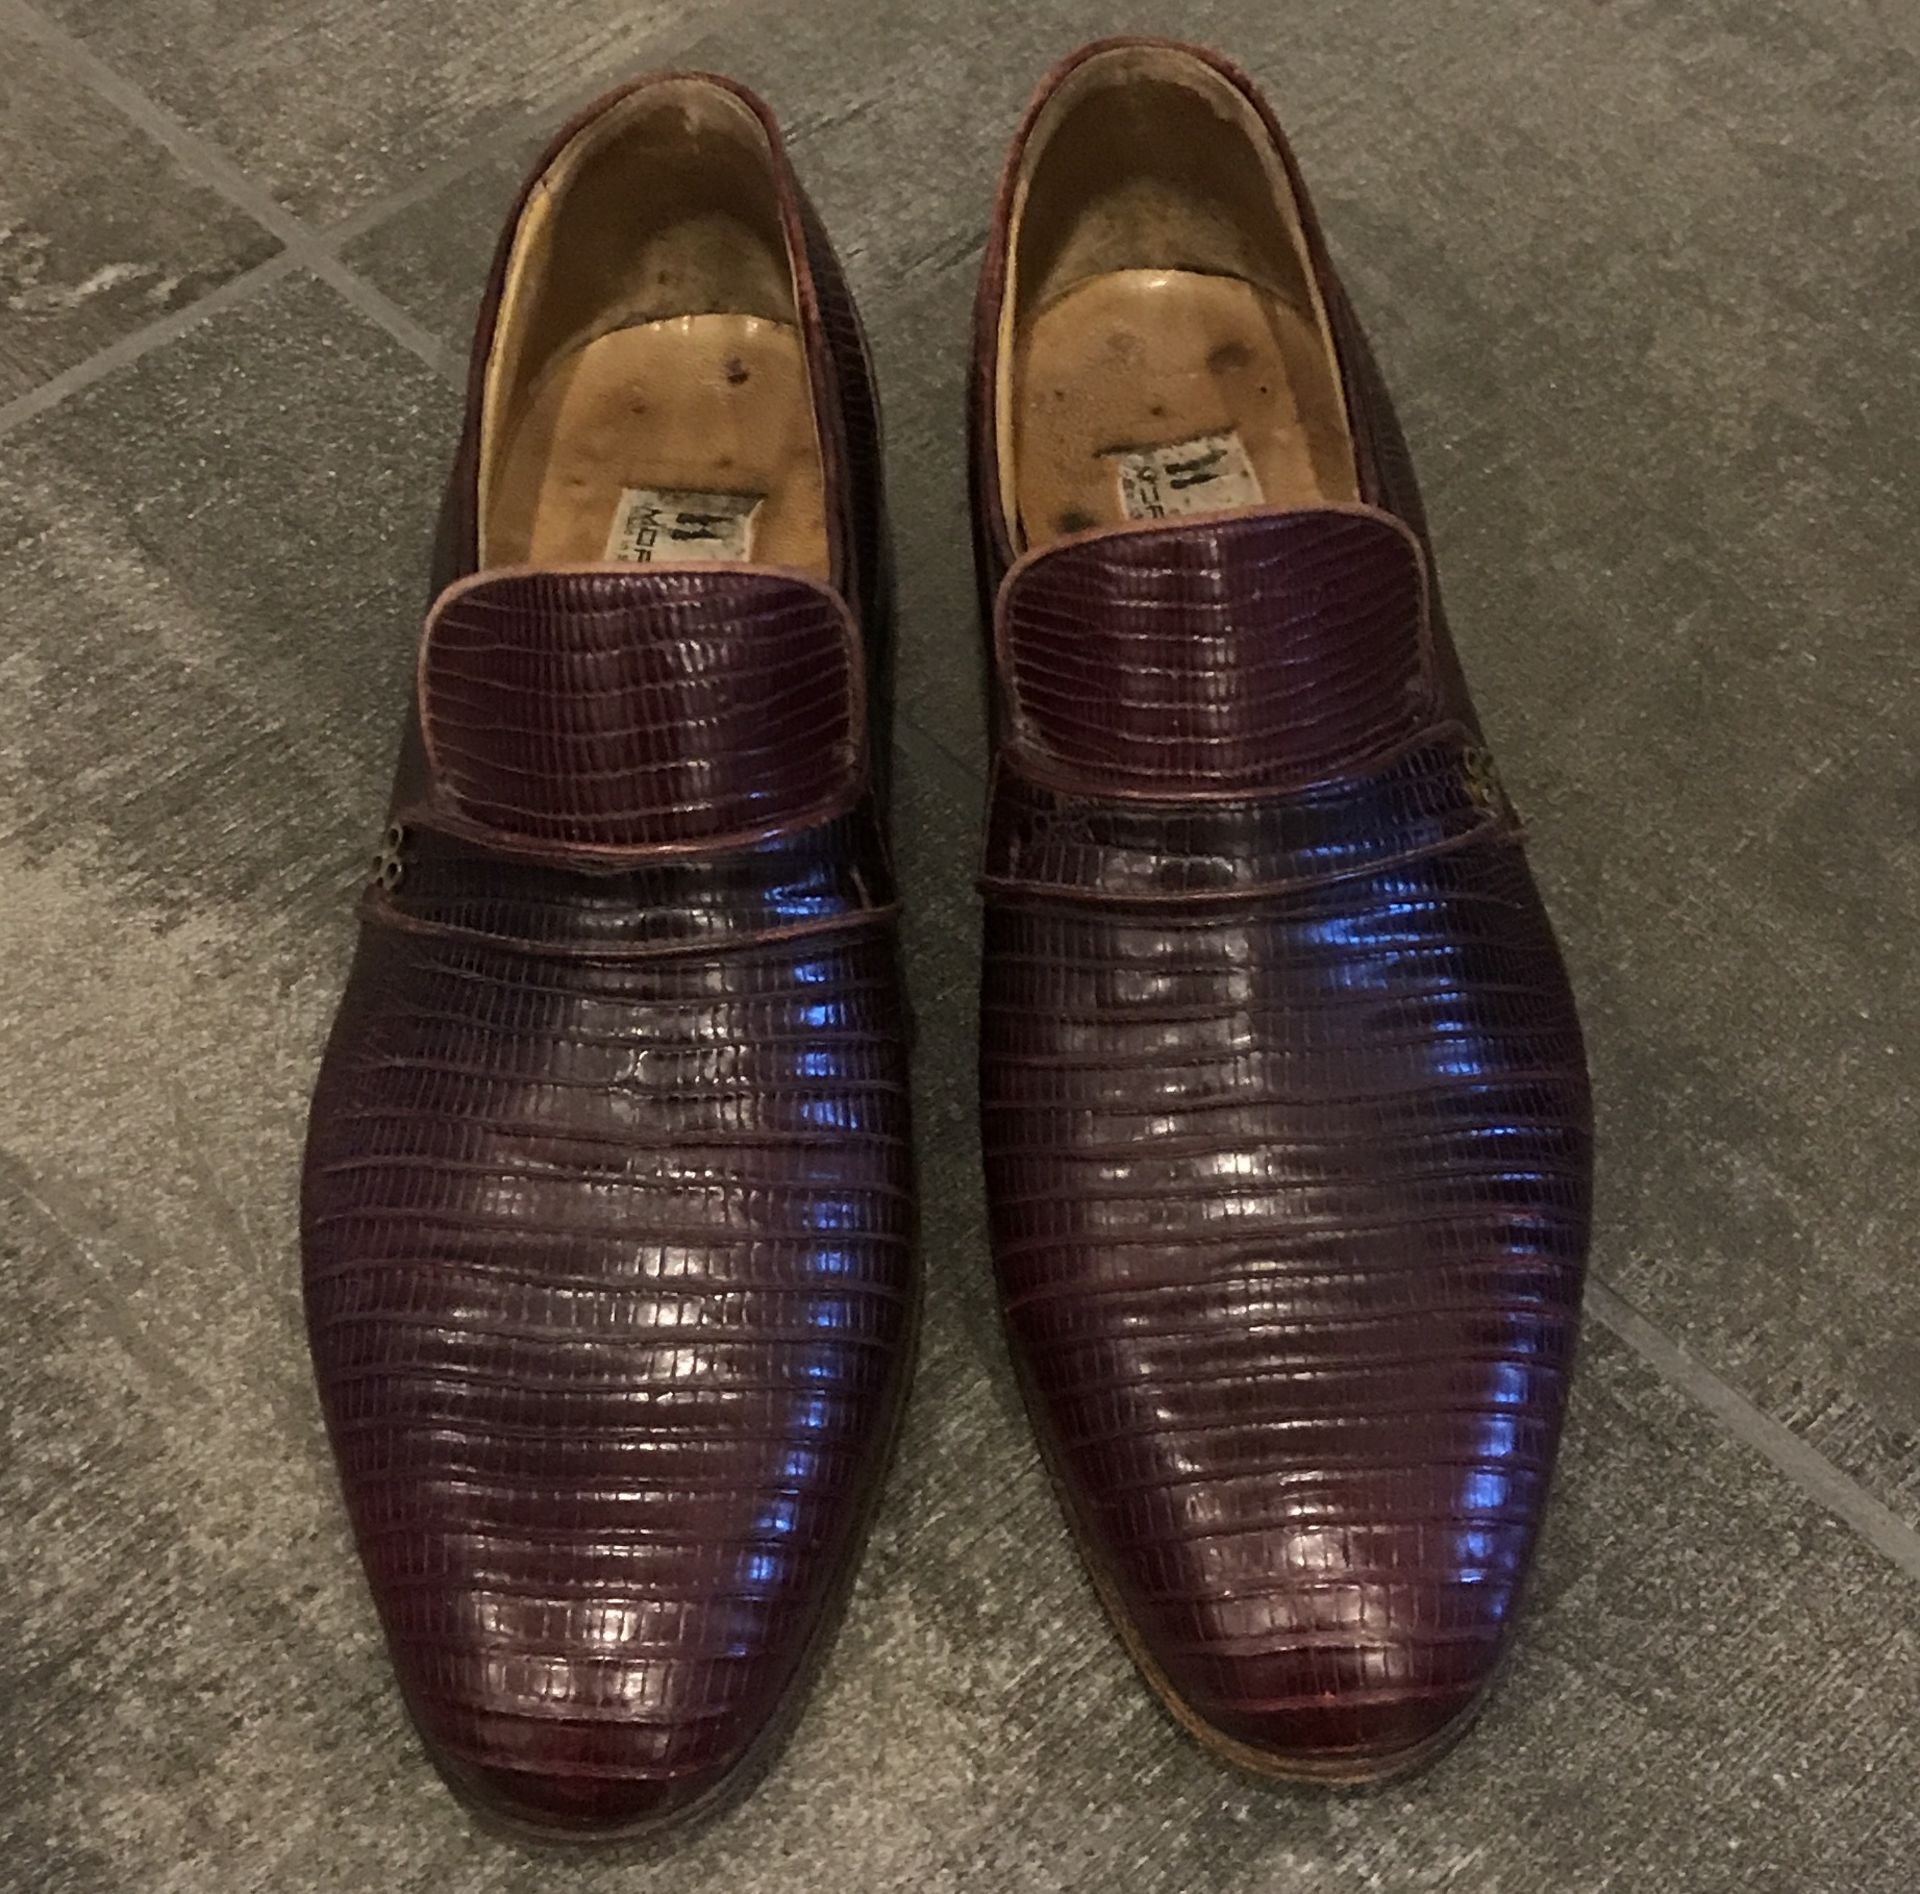 MEN'S MORESCHI SIZE 8 BURGUNDY ALLIGATOR LEATHER DRESS SHOES MADE IN ITALY - Image 2 of 4